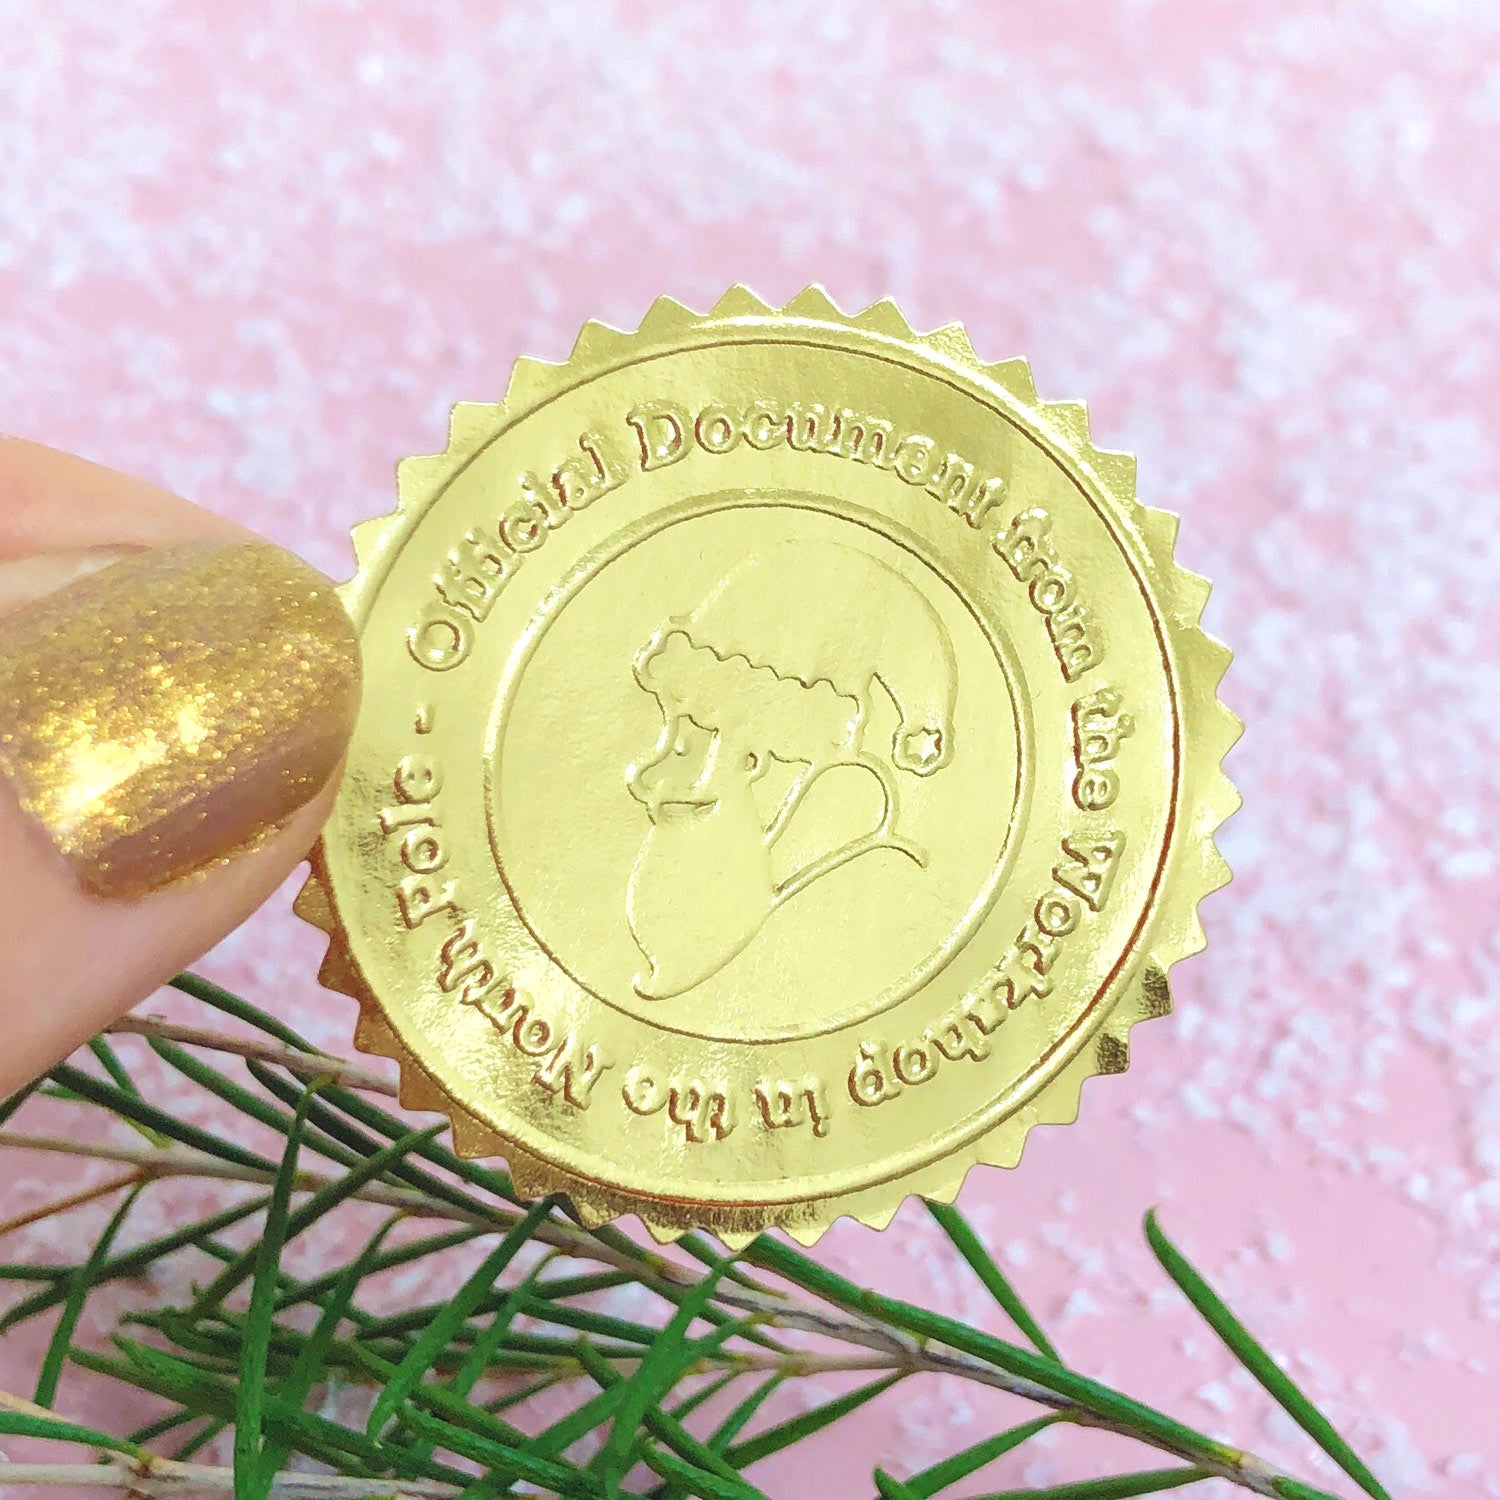 A close up of the shiny gold certificate seal featuring a profile of Santa